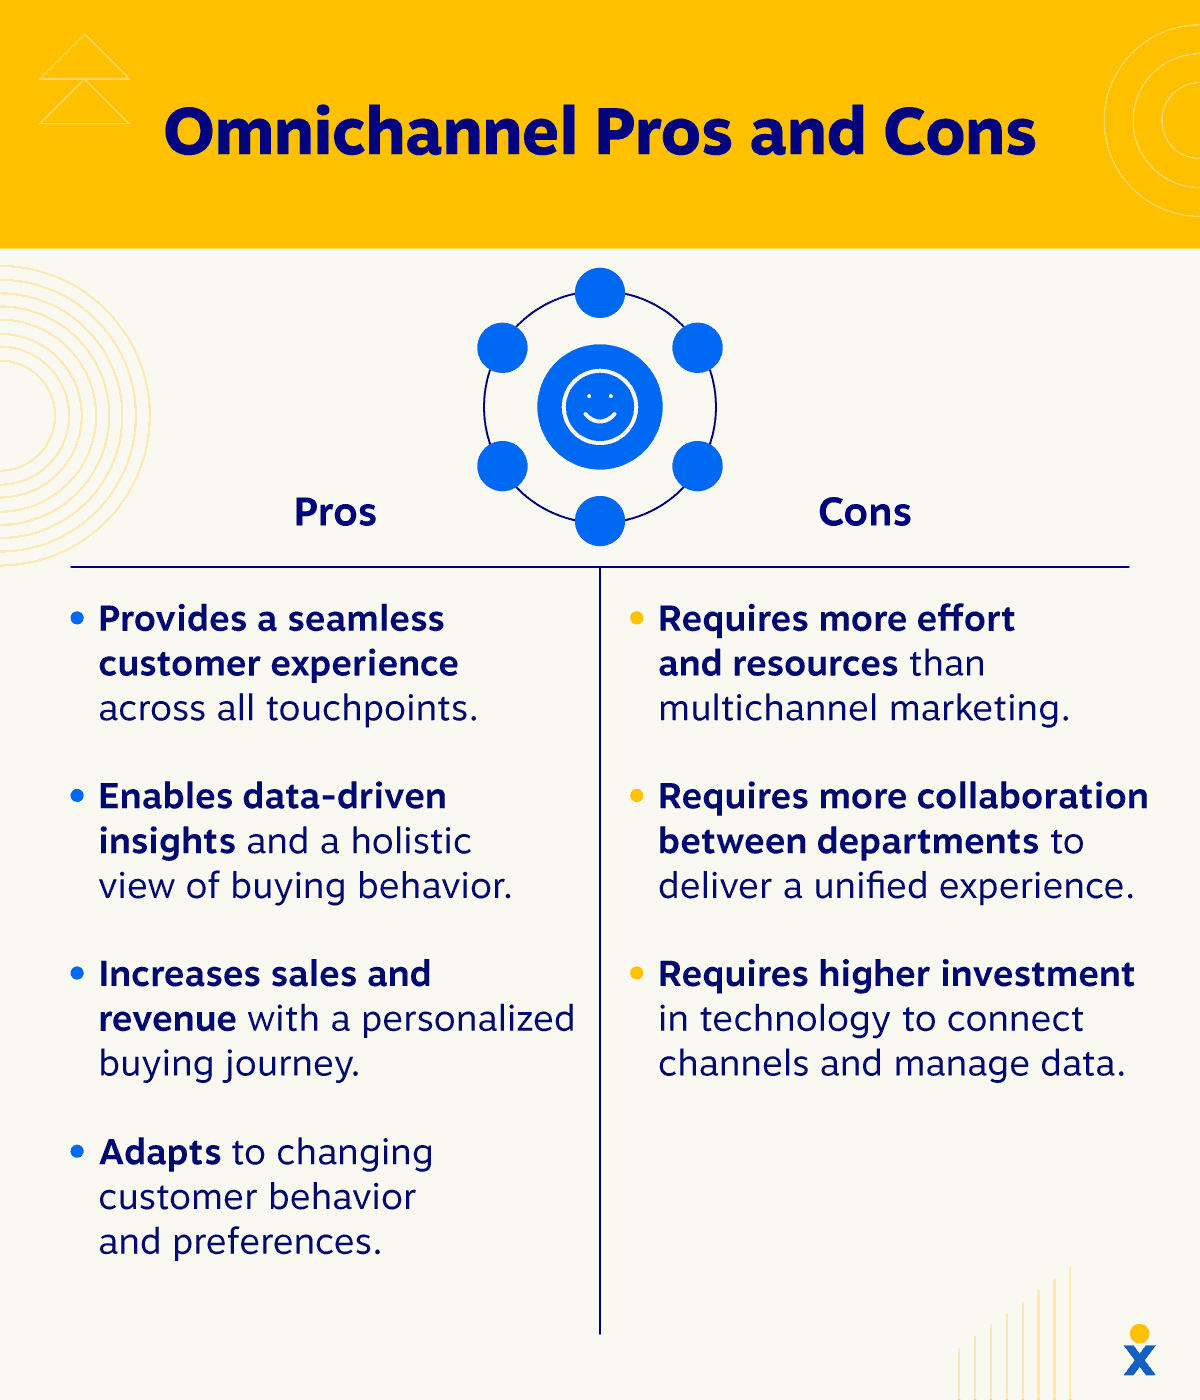 A chart shows omnichannel pros and cons